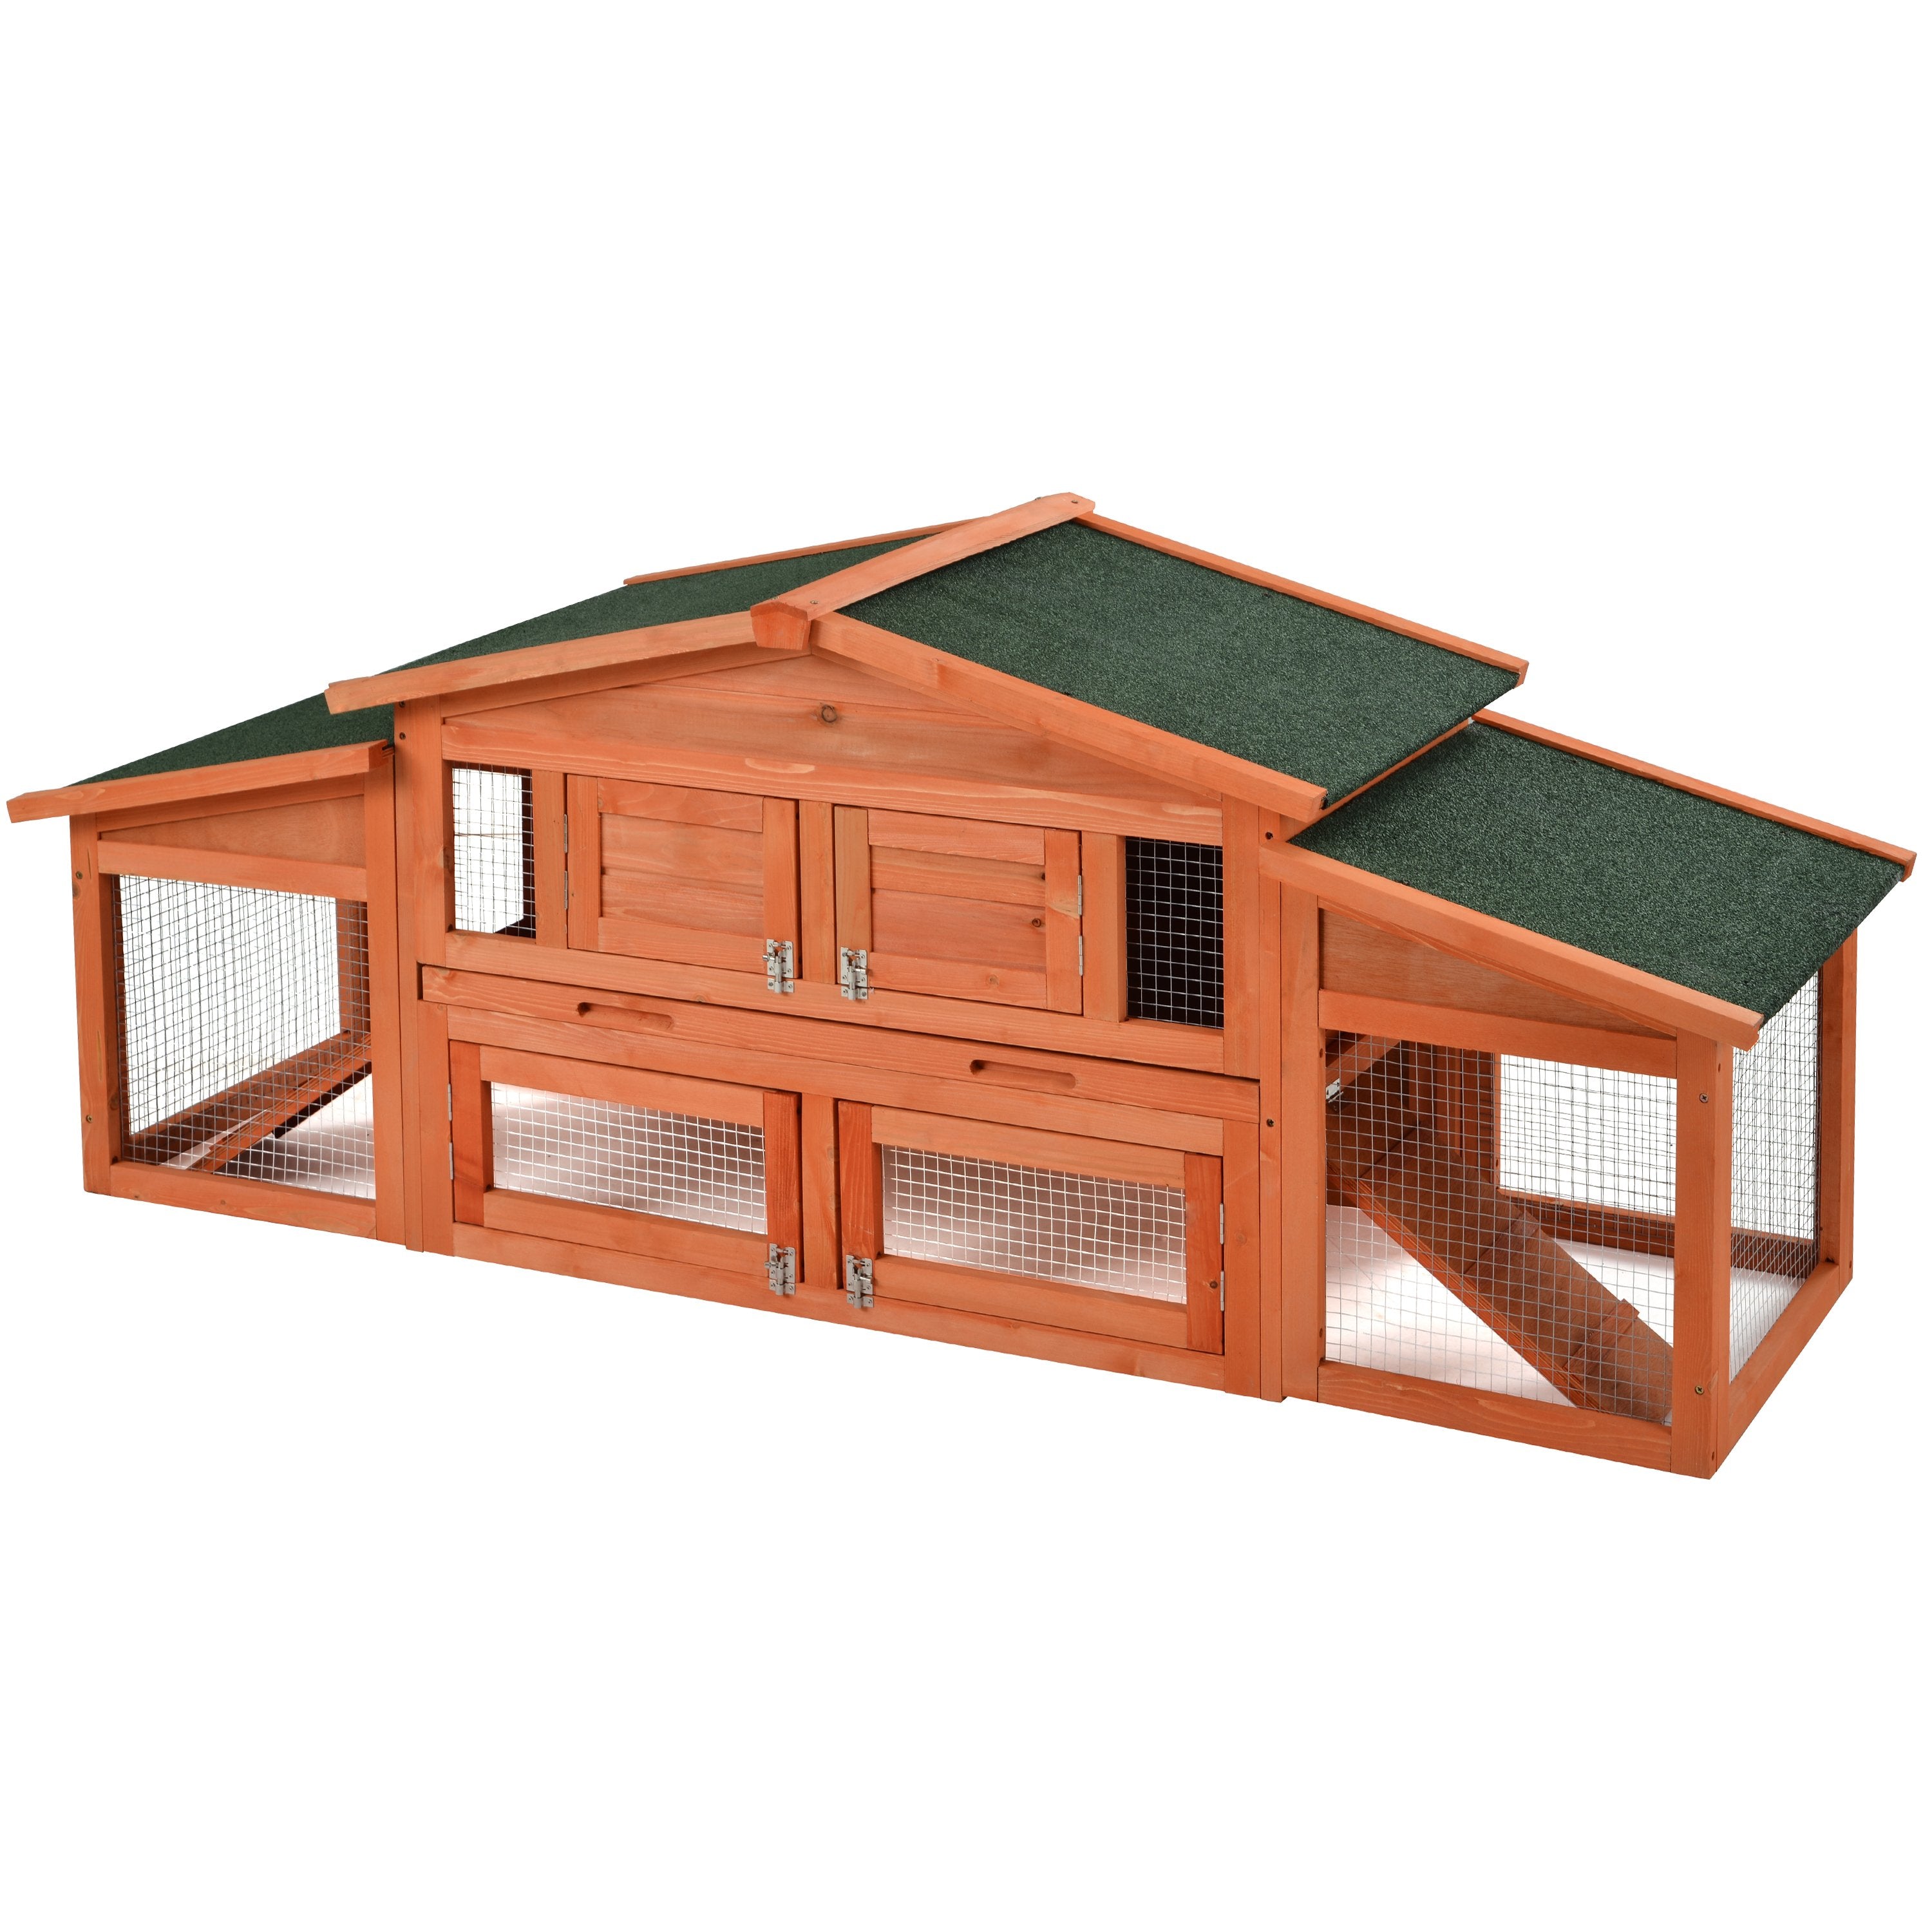 70-Inch Wood Rabbit Hutch Outdoor Pet House Chicken Coop for Small Animals with 2 Run Play Area-Boyel Living